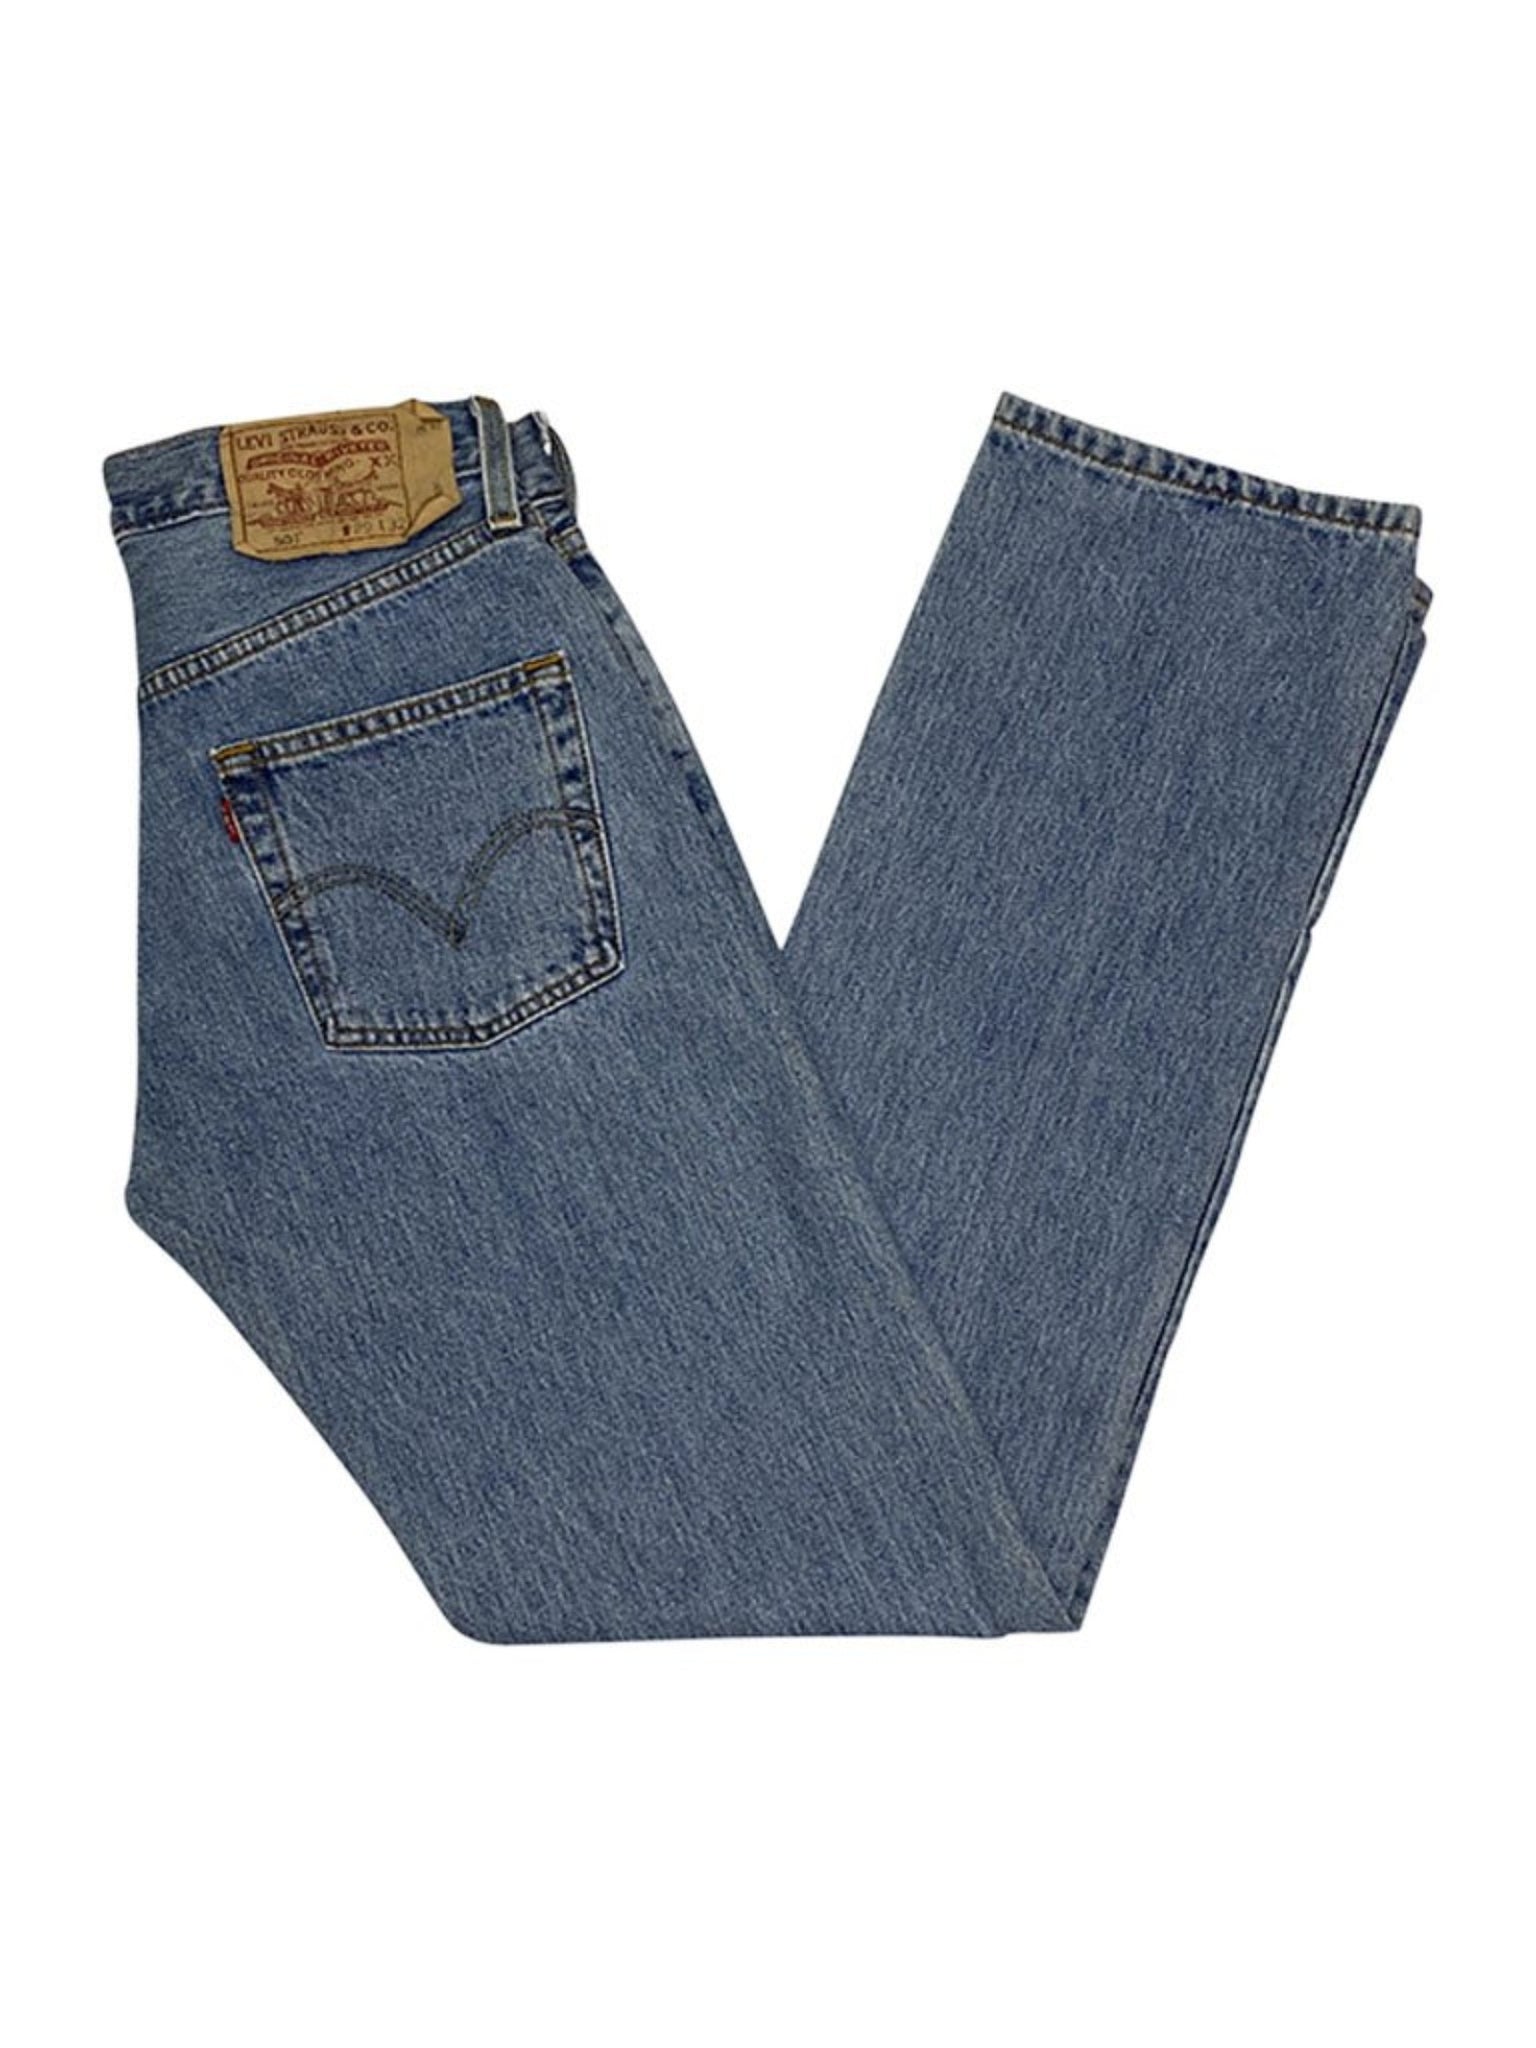 Vintage Levi's 501 Jeans Bundle – American Recycled Clothing Wholesale